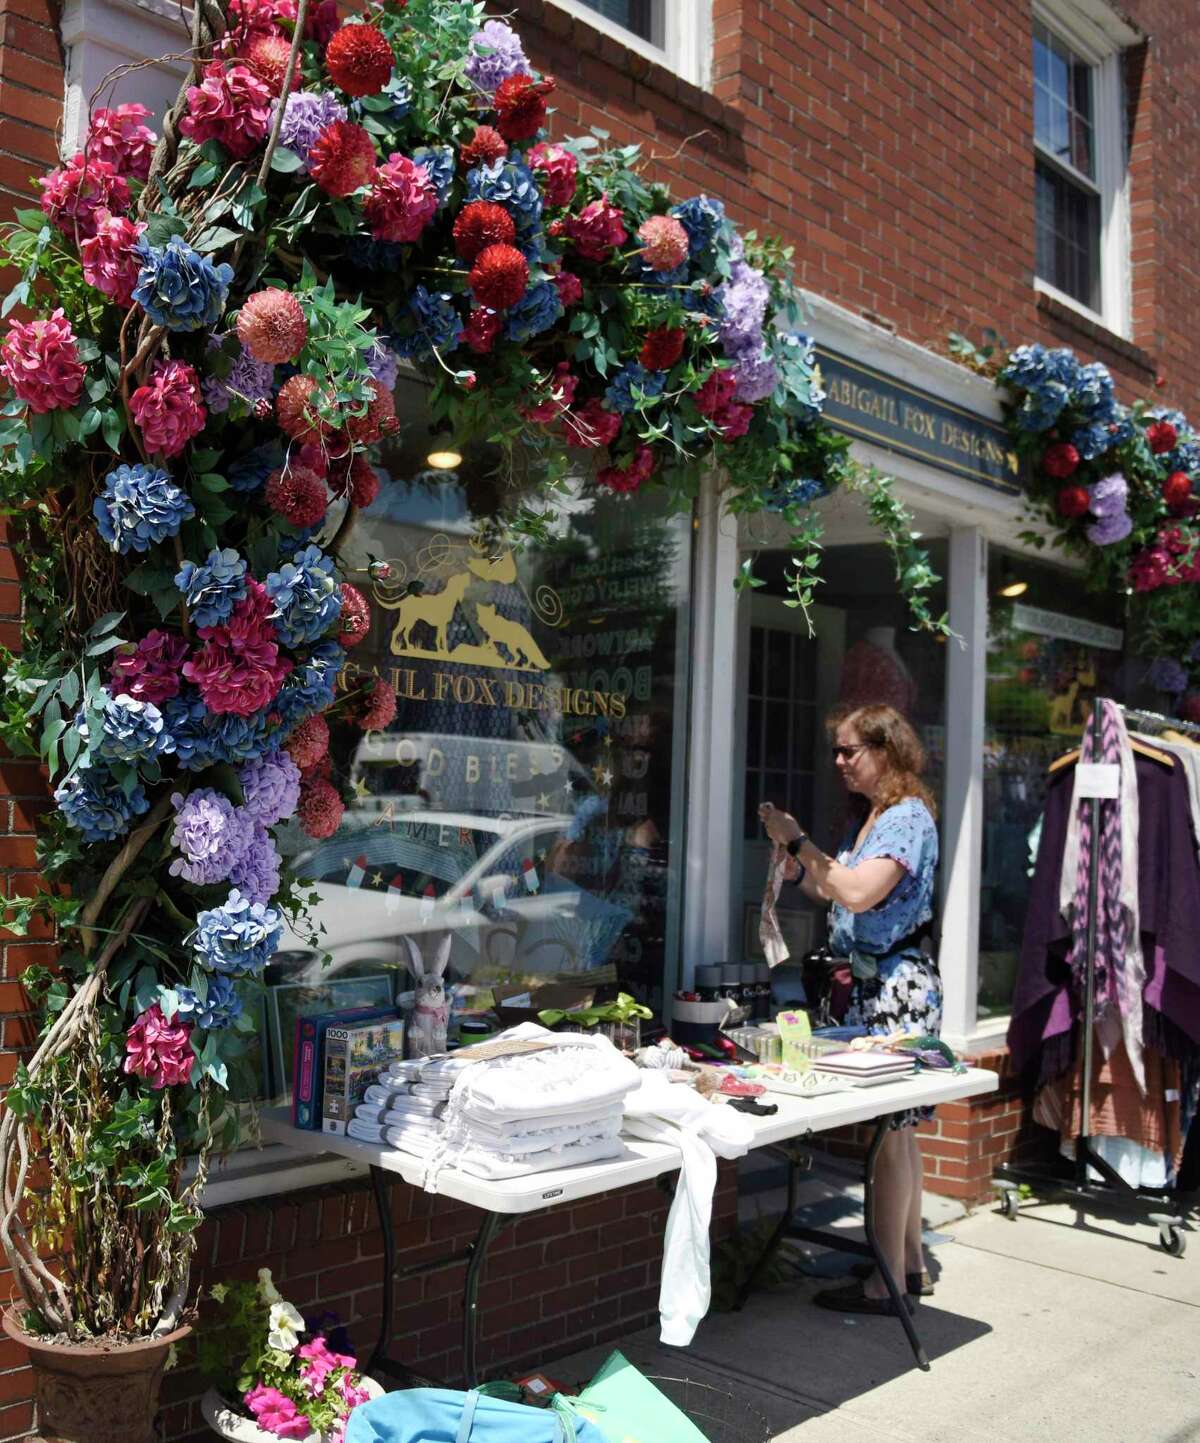 Stamford's Roseanne Hurvitz browses items at Abigail Fox Designs during the Old Greenwich Merchants Association Sidewalk Sales in Old Greenwich, Conn. Thursday, June 23, 2022. More than 20 local businesses participated in the sale, putting marked down items outside along the sidewalk of Sound Beach Avenue. The sidewalk sale continues through Sunday.